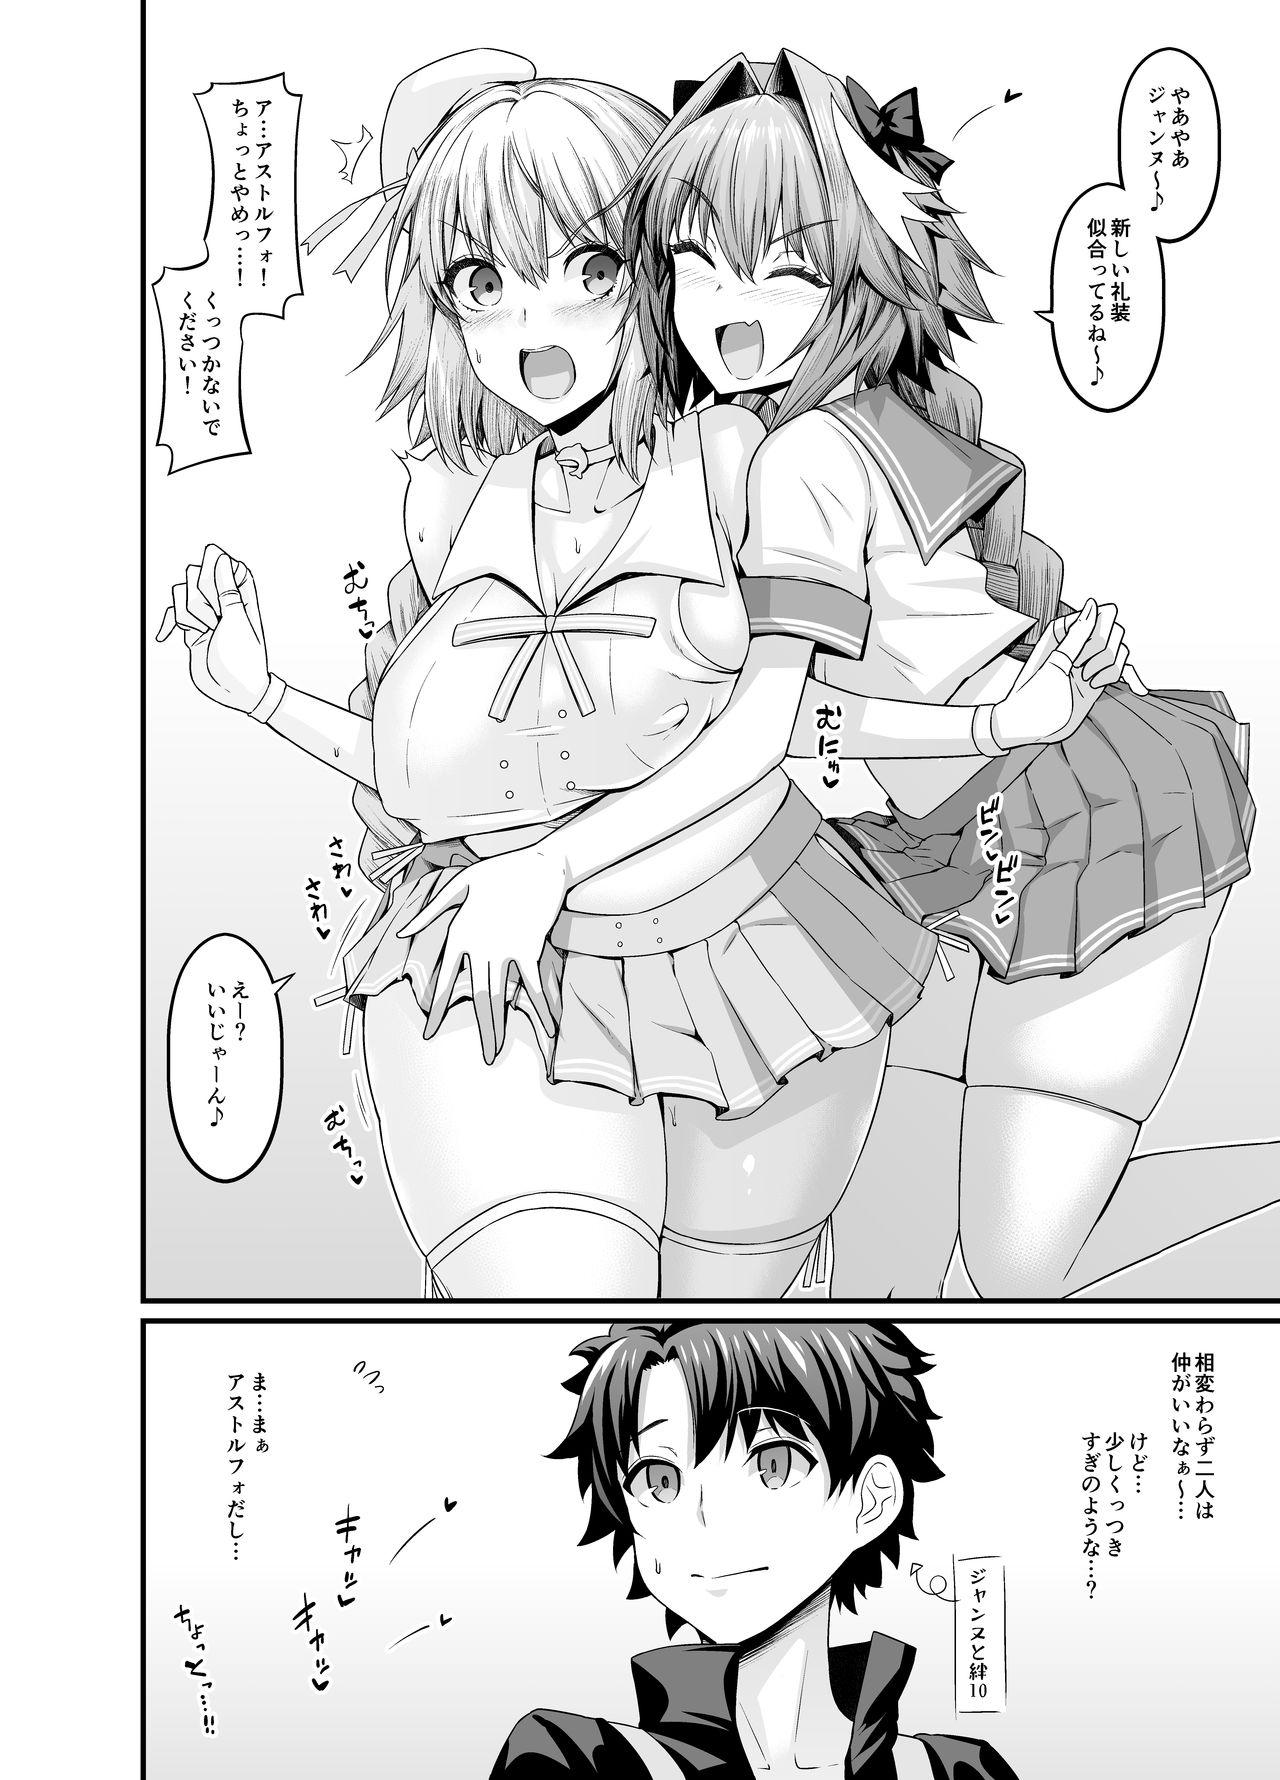 Astolfo Makes Friends with Jeanne 1